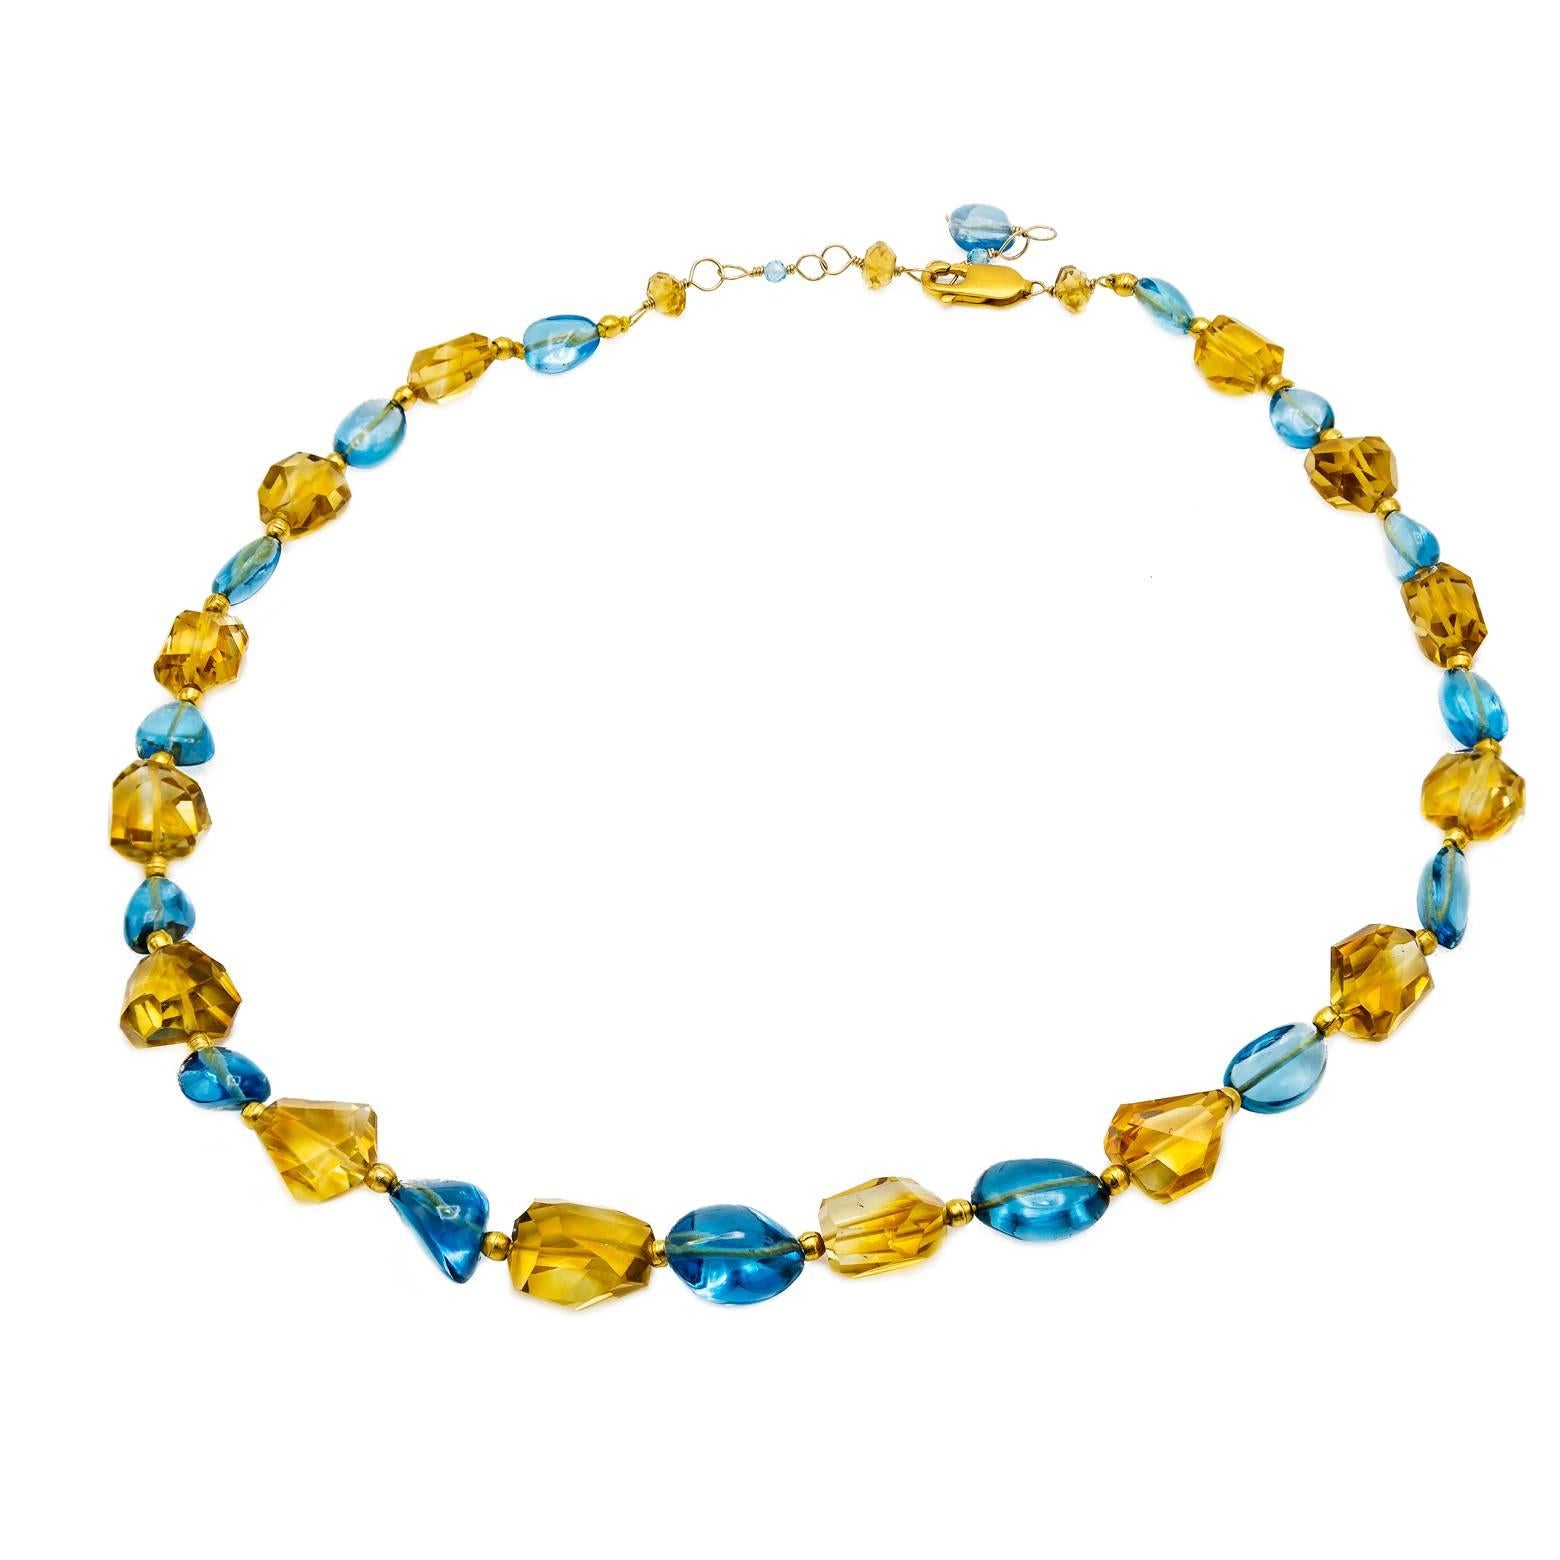 Alternating colors of blue topaz and citrine create a beautiful Caribbean Sea vacation palate sure to transport you to paradise. With facets on every unique bead separated by gold beads this elegant necklace is sure to dazzle your wild imagination. 